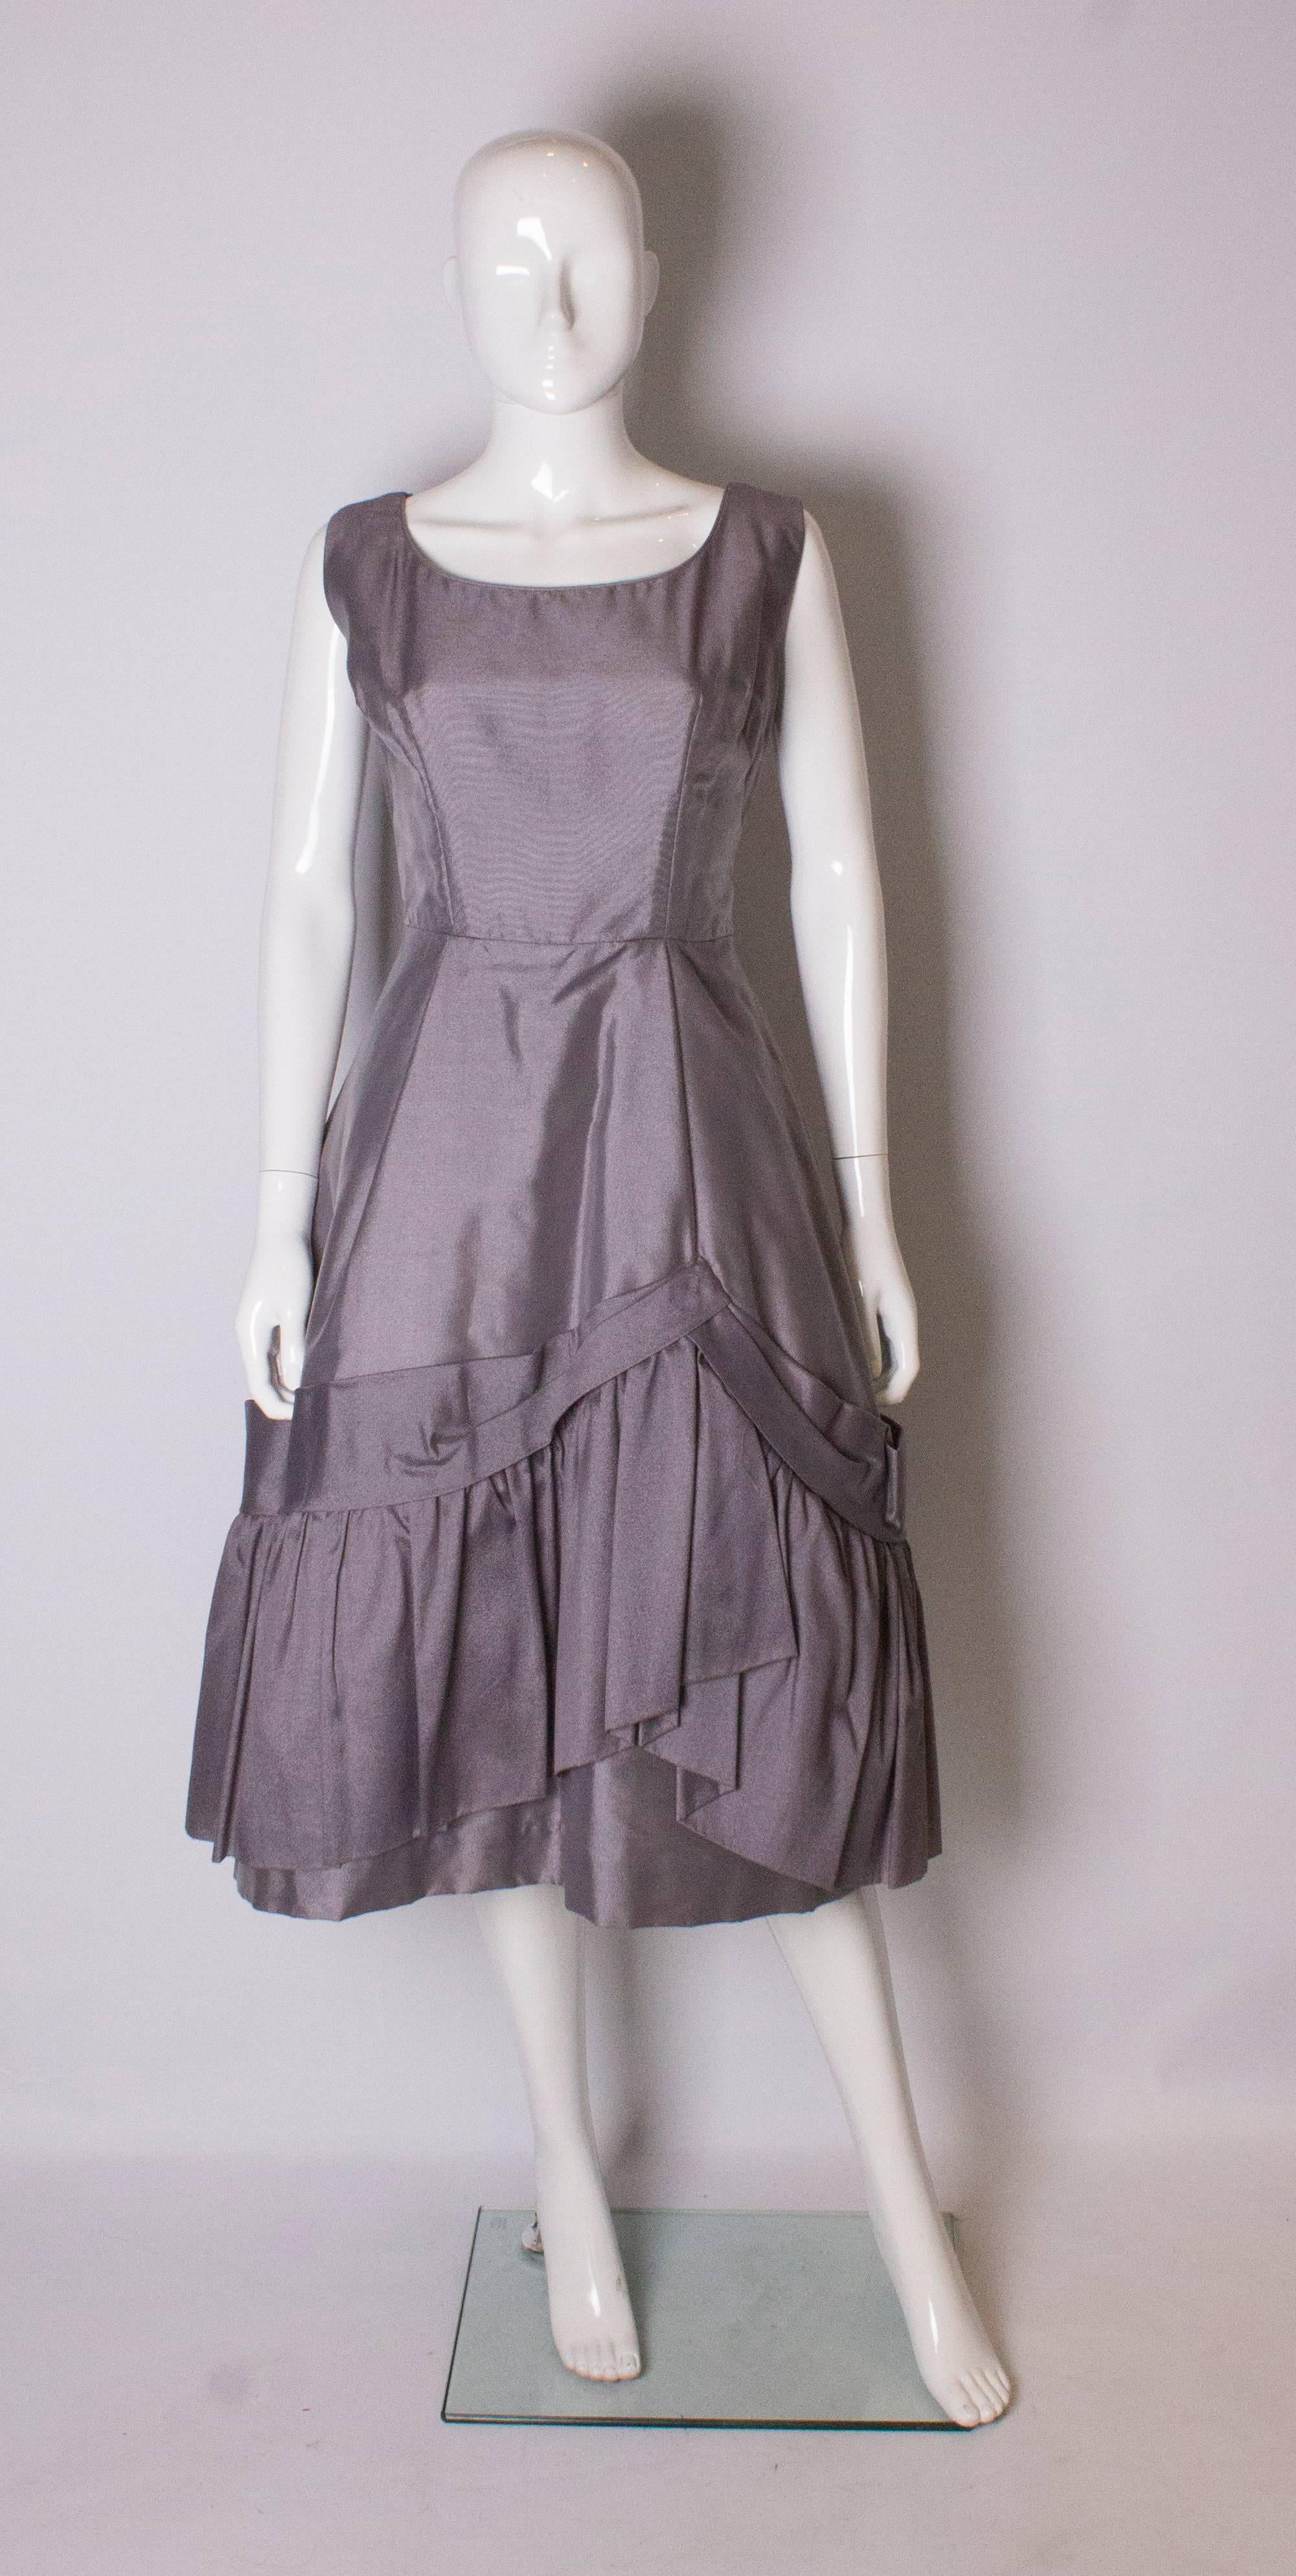 A pretty dove grey cocktail dress by Zenith Original. The dress has a scoop necklline, front and back and as a built in petticoat with frill at the hem.